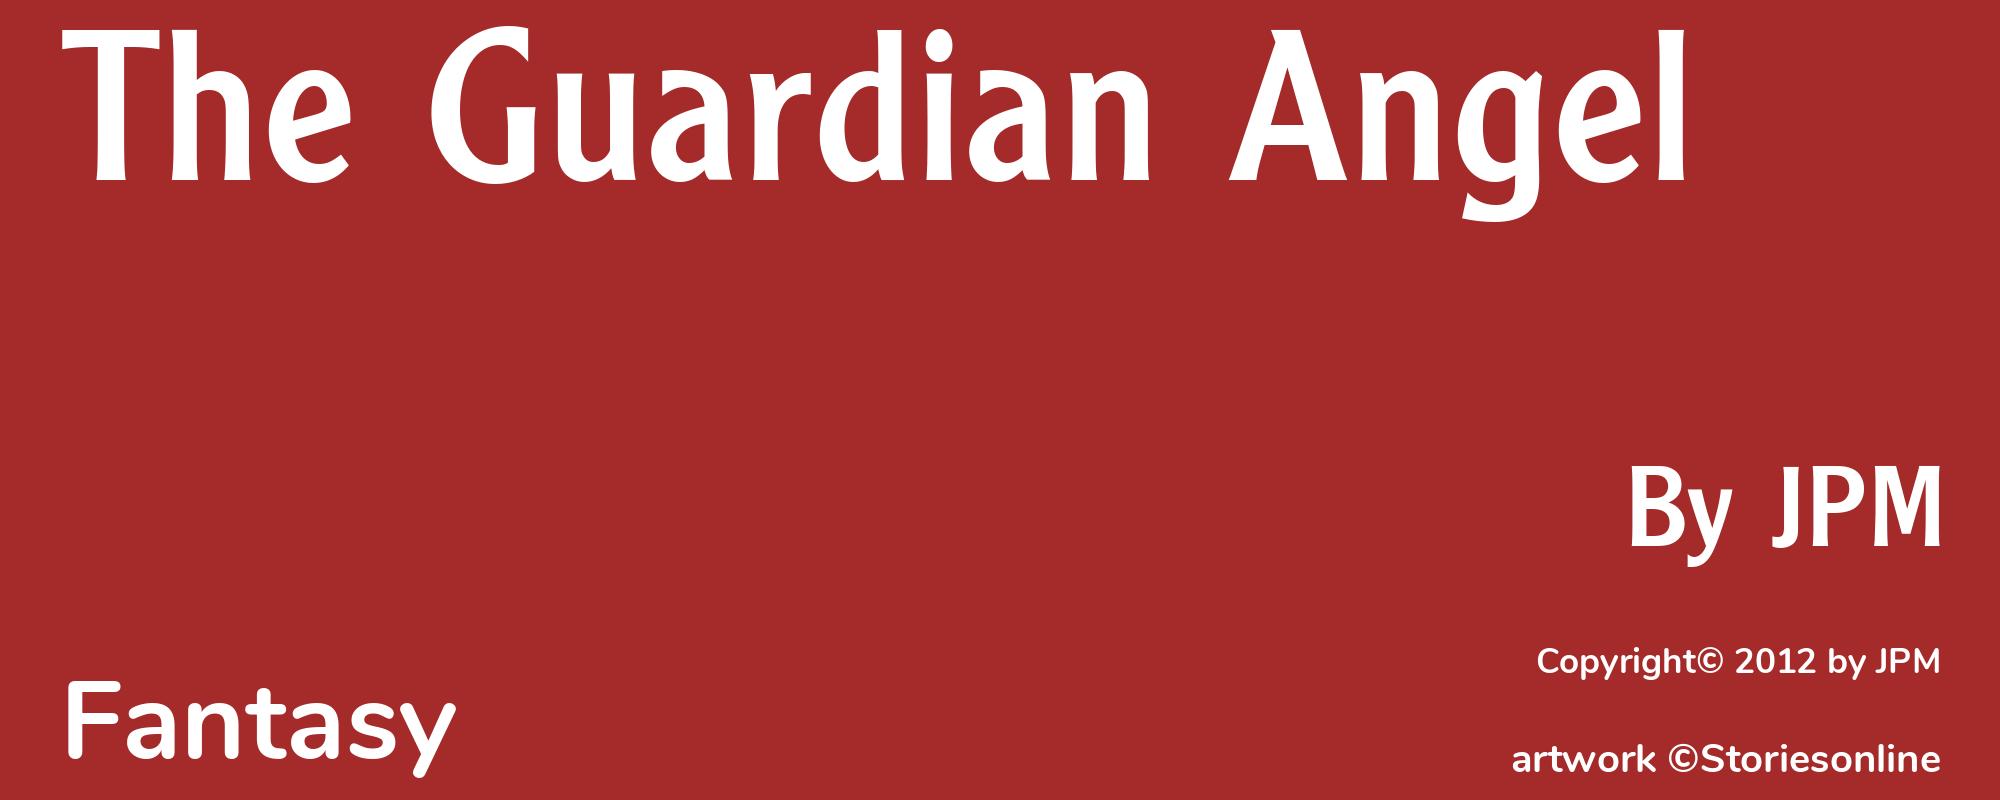 The Guardian Angel - Cover